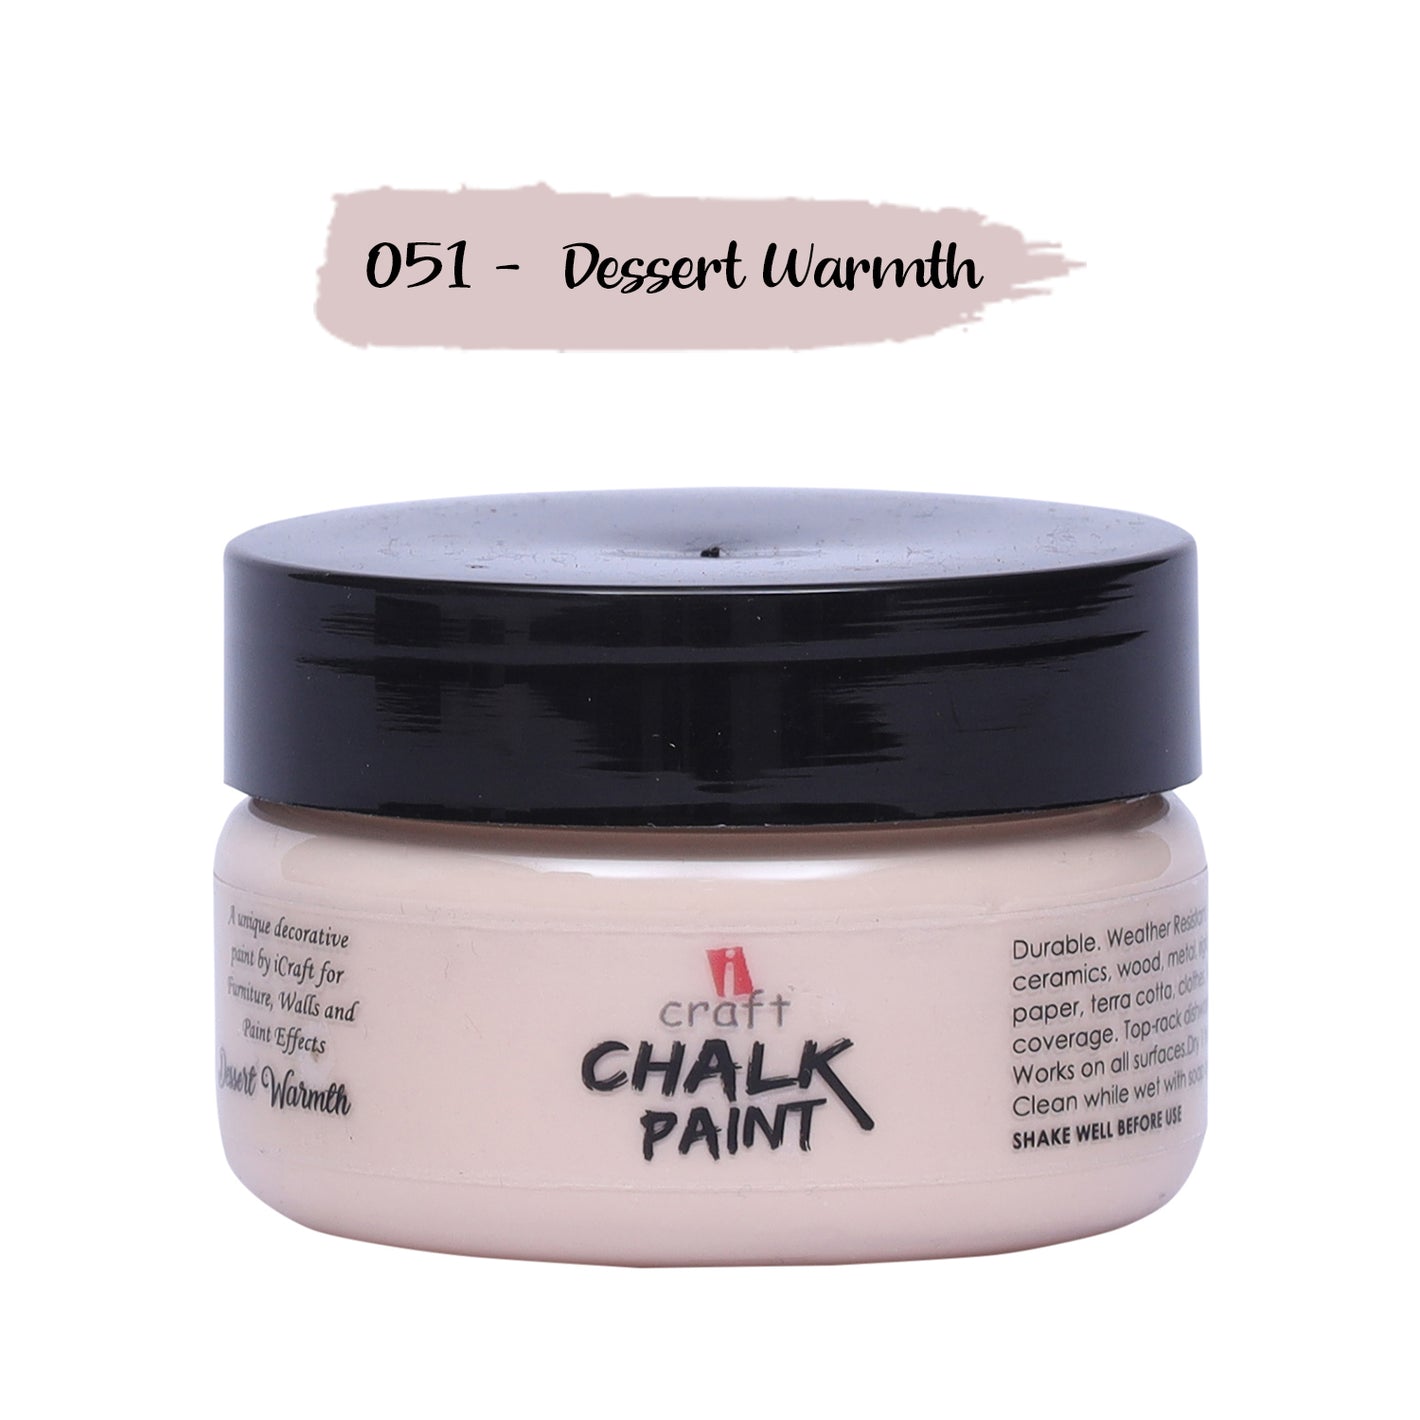 iCraft Premium Chalk Paint - Smooth, Creamy & Non-Toxic - Ideal for DIY & Resin Projects-50ml Dessert Warmth